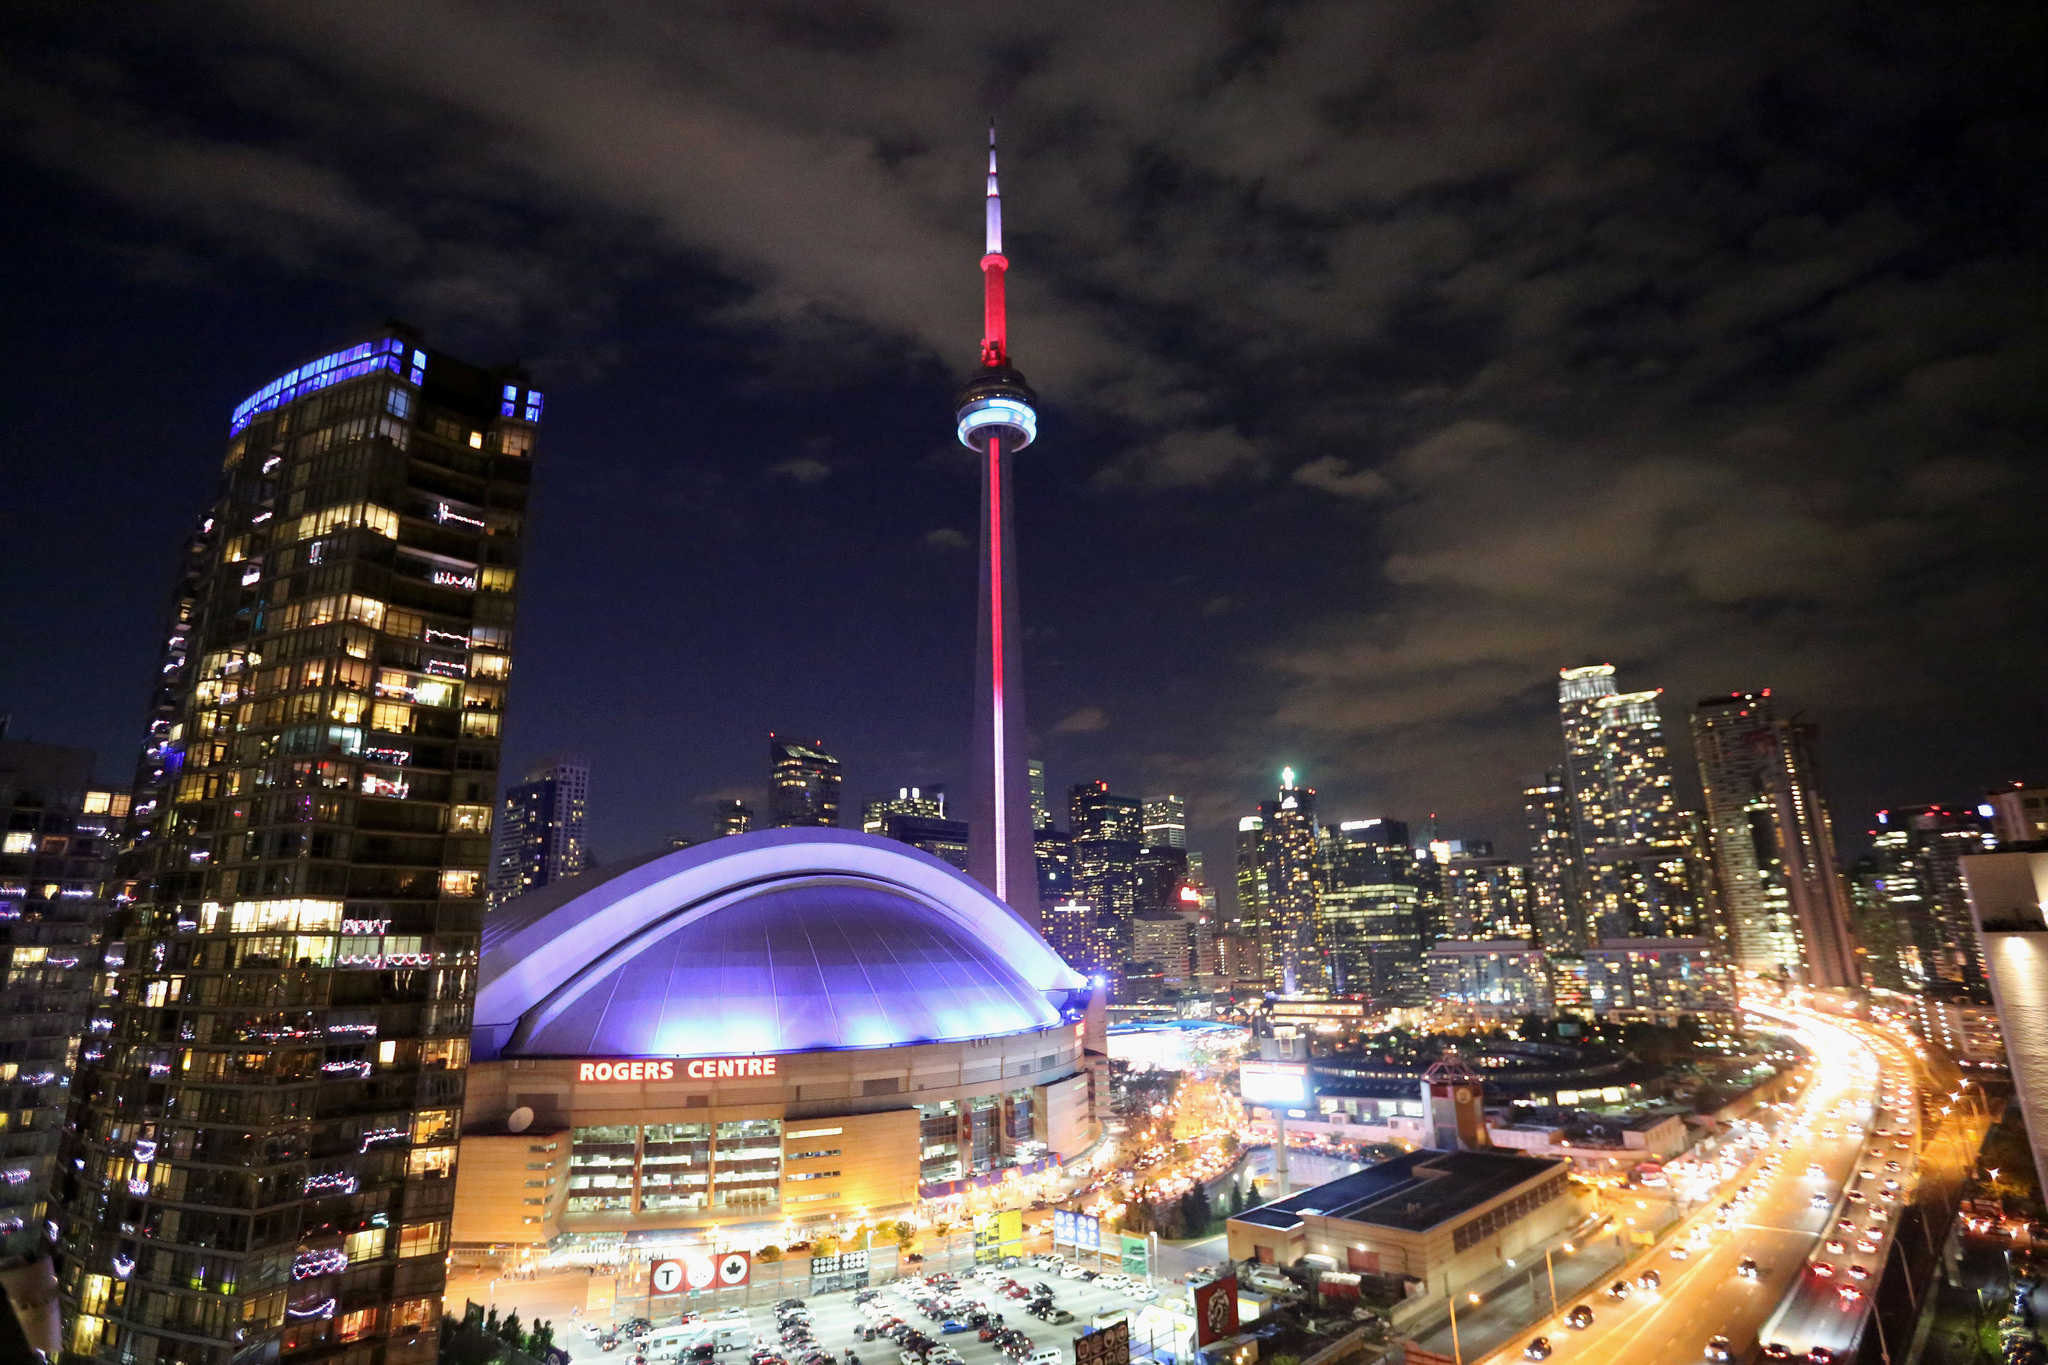 Gorgeous shot of CN Tower and Toronto at night, with so many twinkling lights.